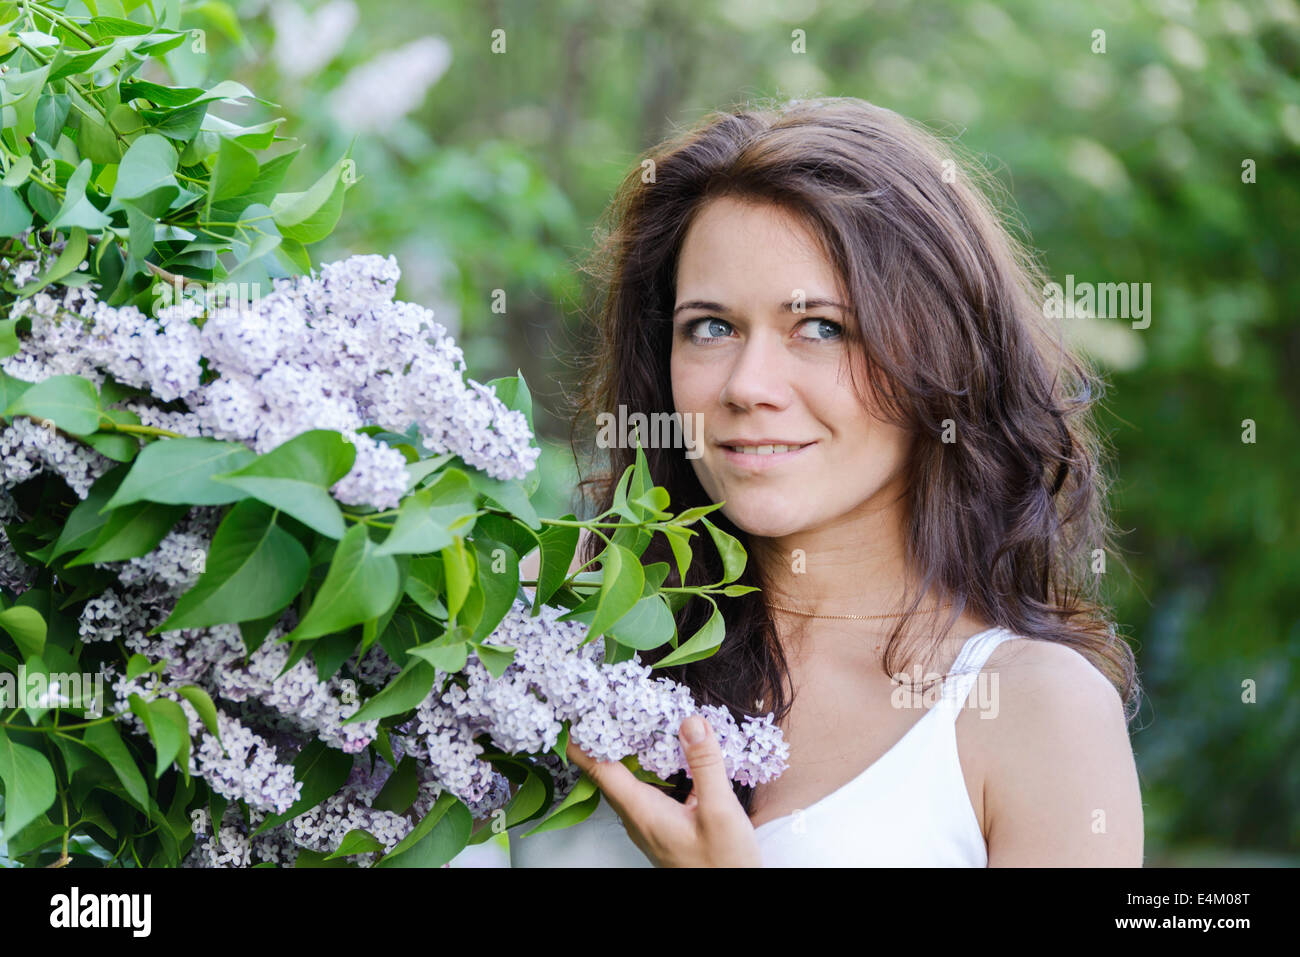 Girl near blossoming lilac Stock Photo